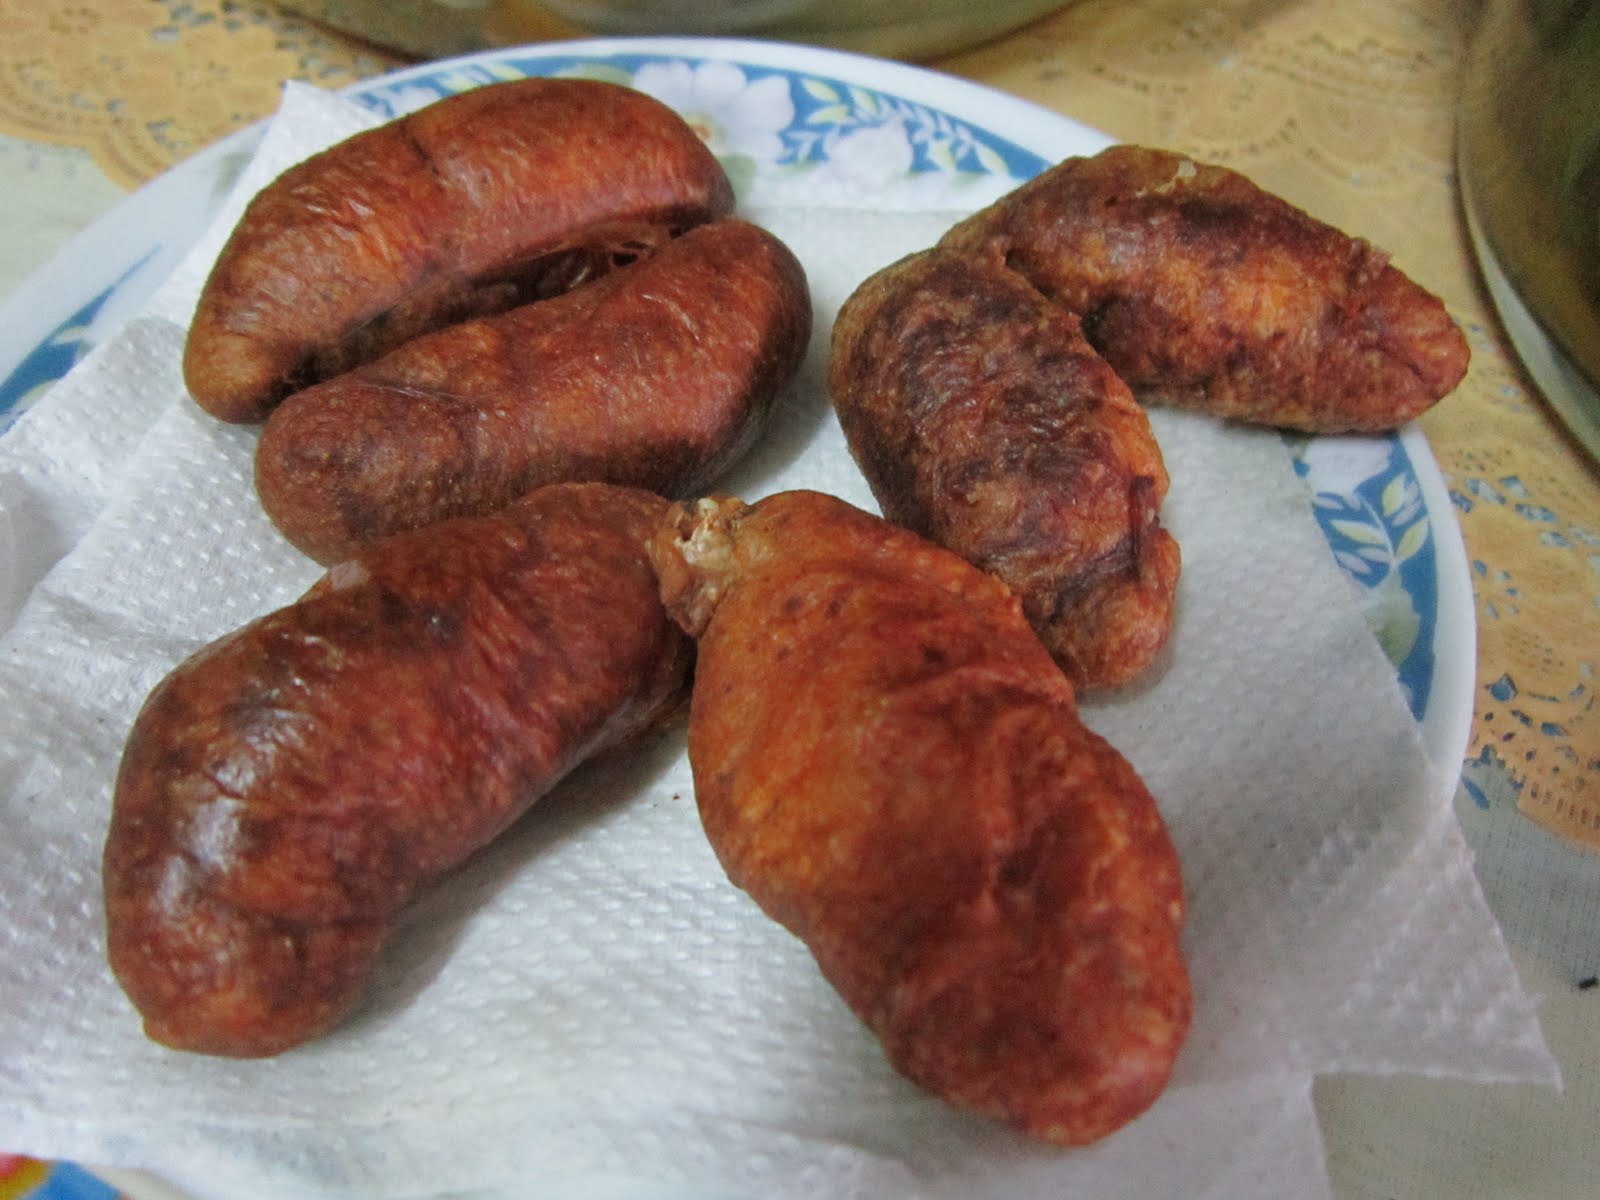 Apparently the liver, deep-fried in batter. To be eaten with fried rice. Img from The Madah's blog.